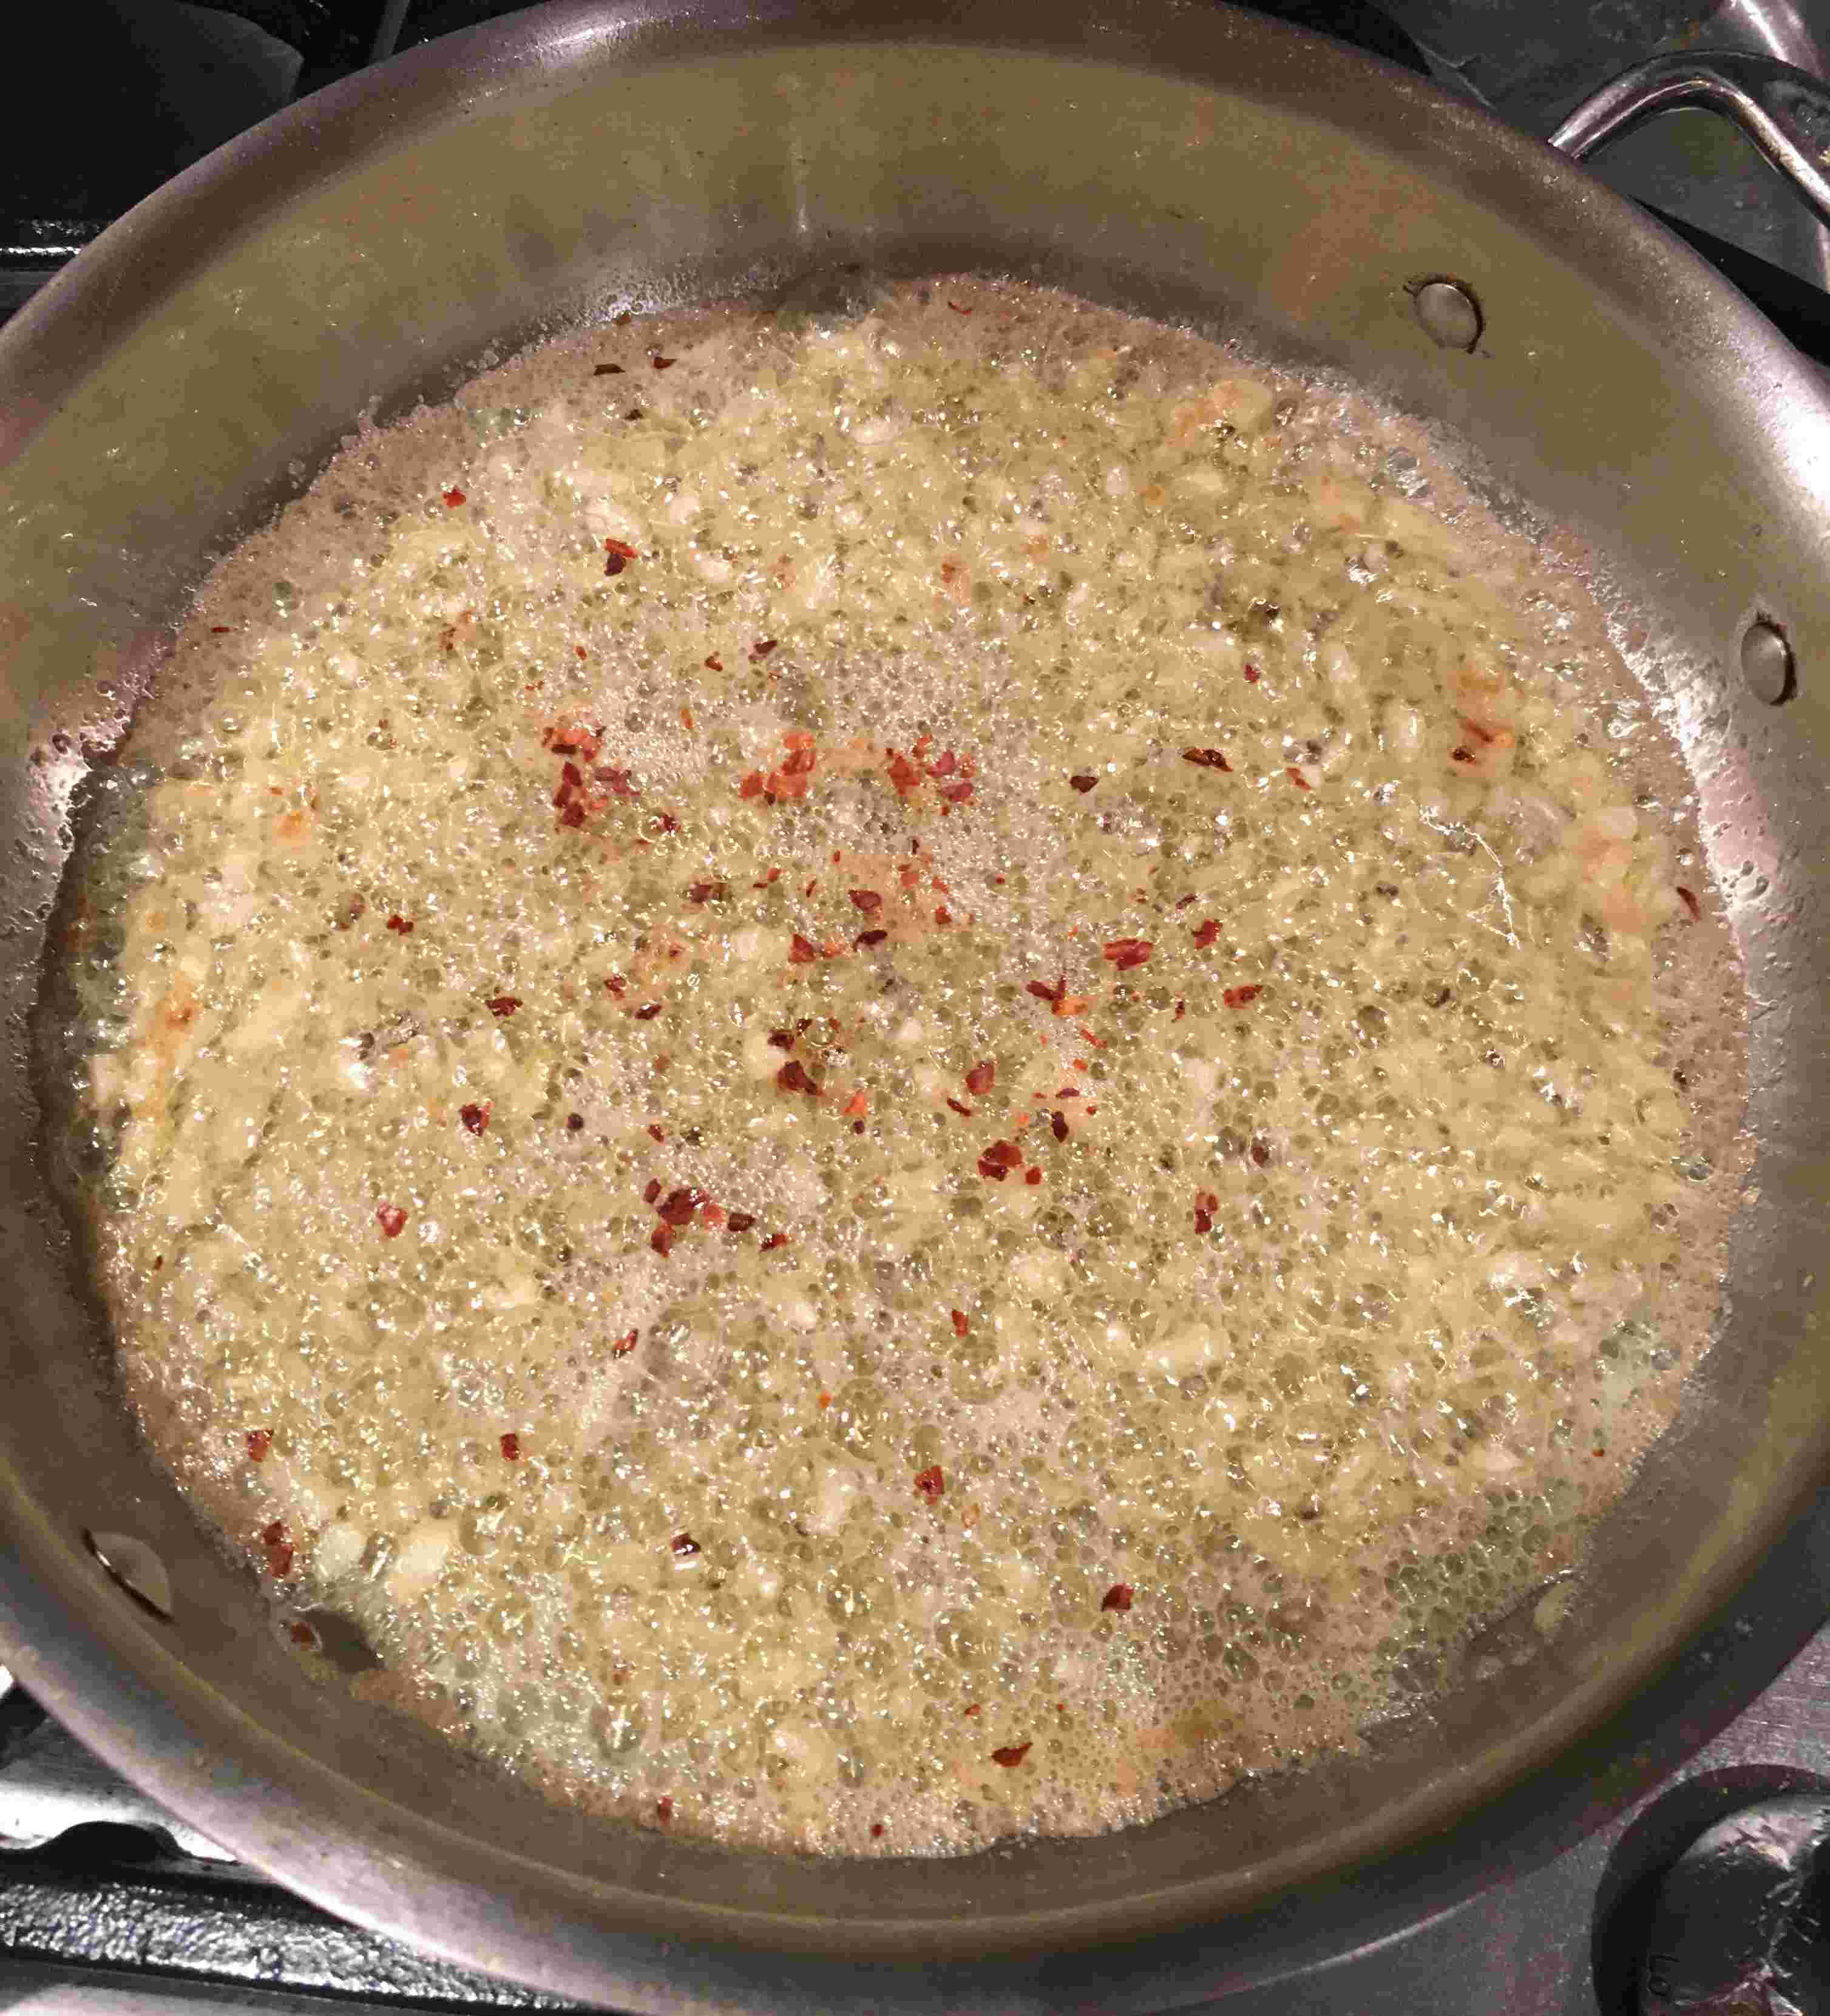 Garlic and red pepper sizzling in olive oil and butter